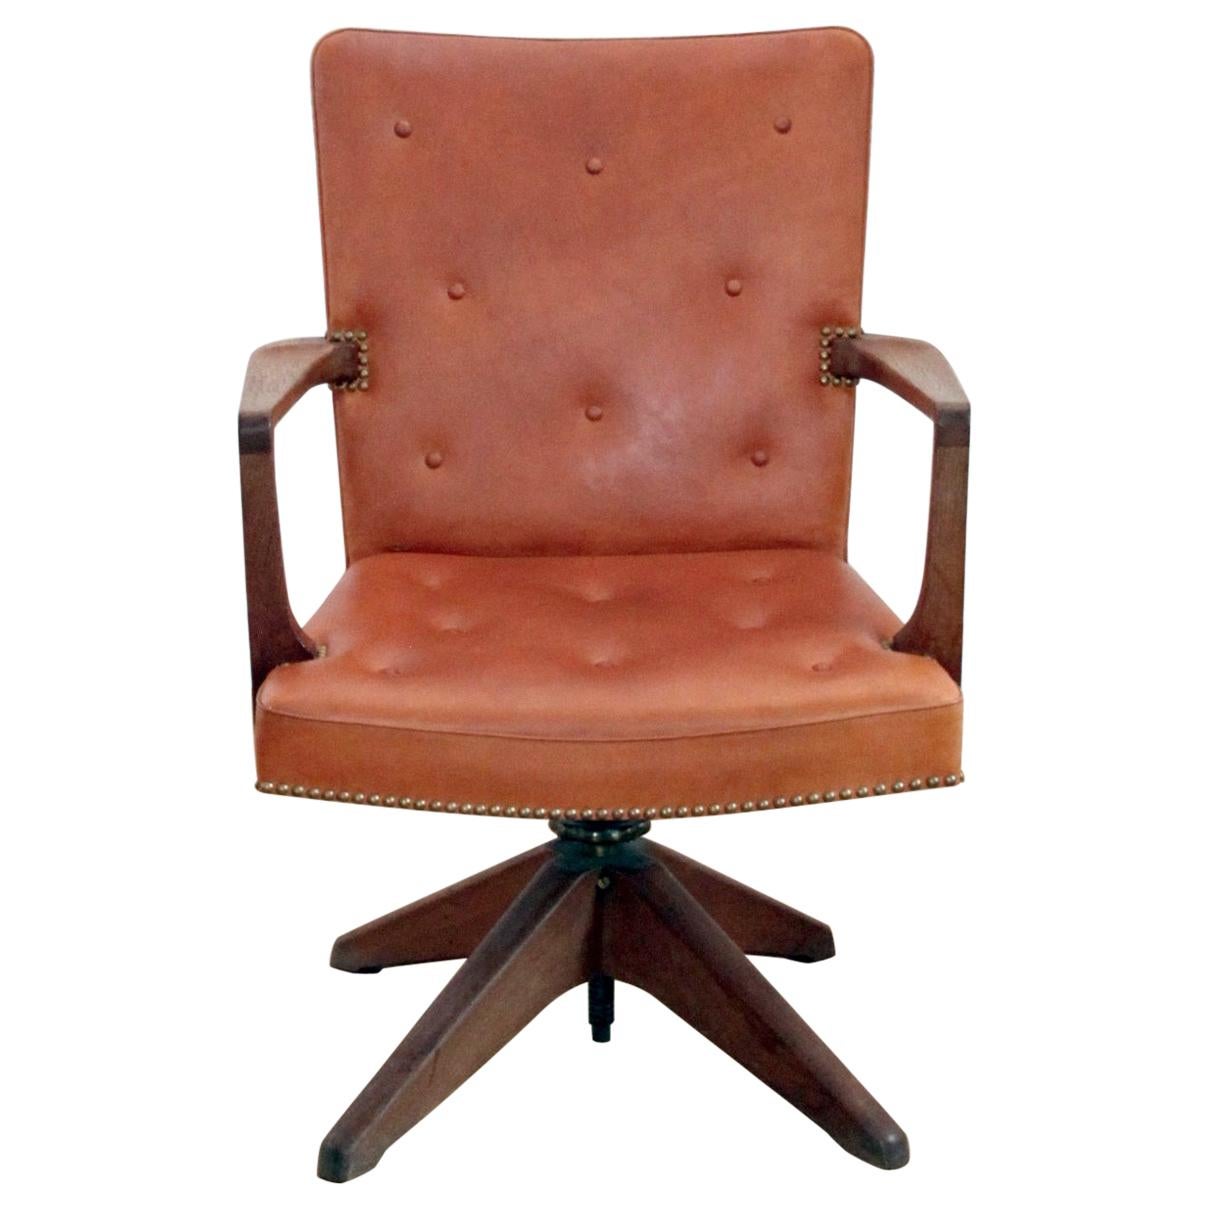 Rare Executive Desk Chair in Walnut, Brass and Leather, Palle Suenson, 1940s im Angebot